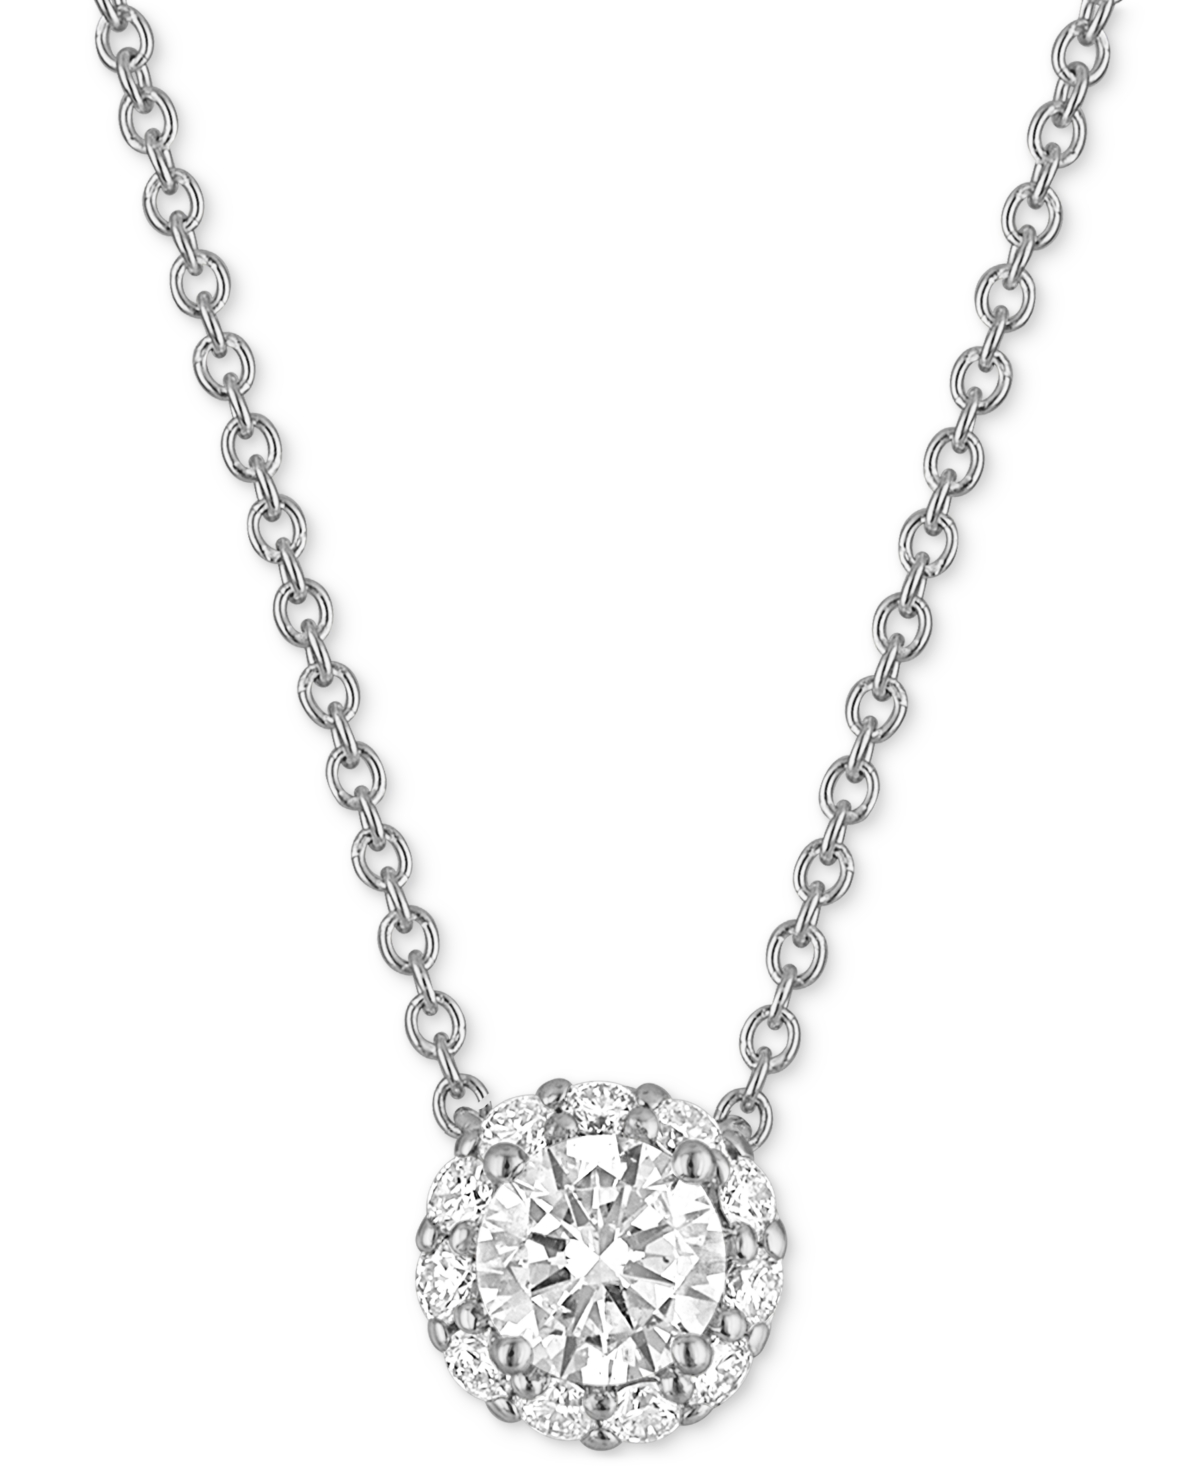 Certified Diamond Halo Pendant Necklace (1/2 ct. t.w.) in 14k White Gold Featuring Diamonds from De Beers Code of Origin, Created for Macy's -